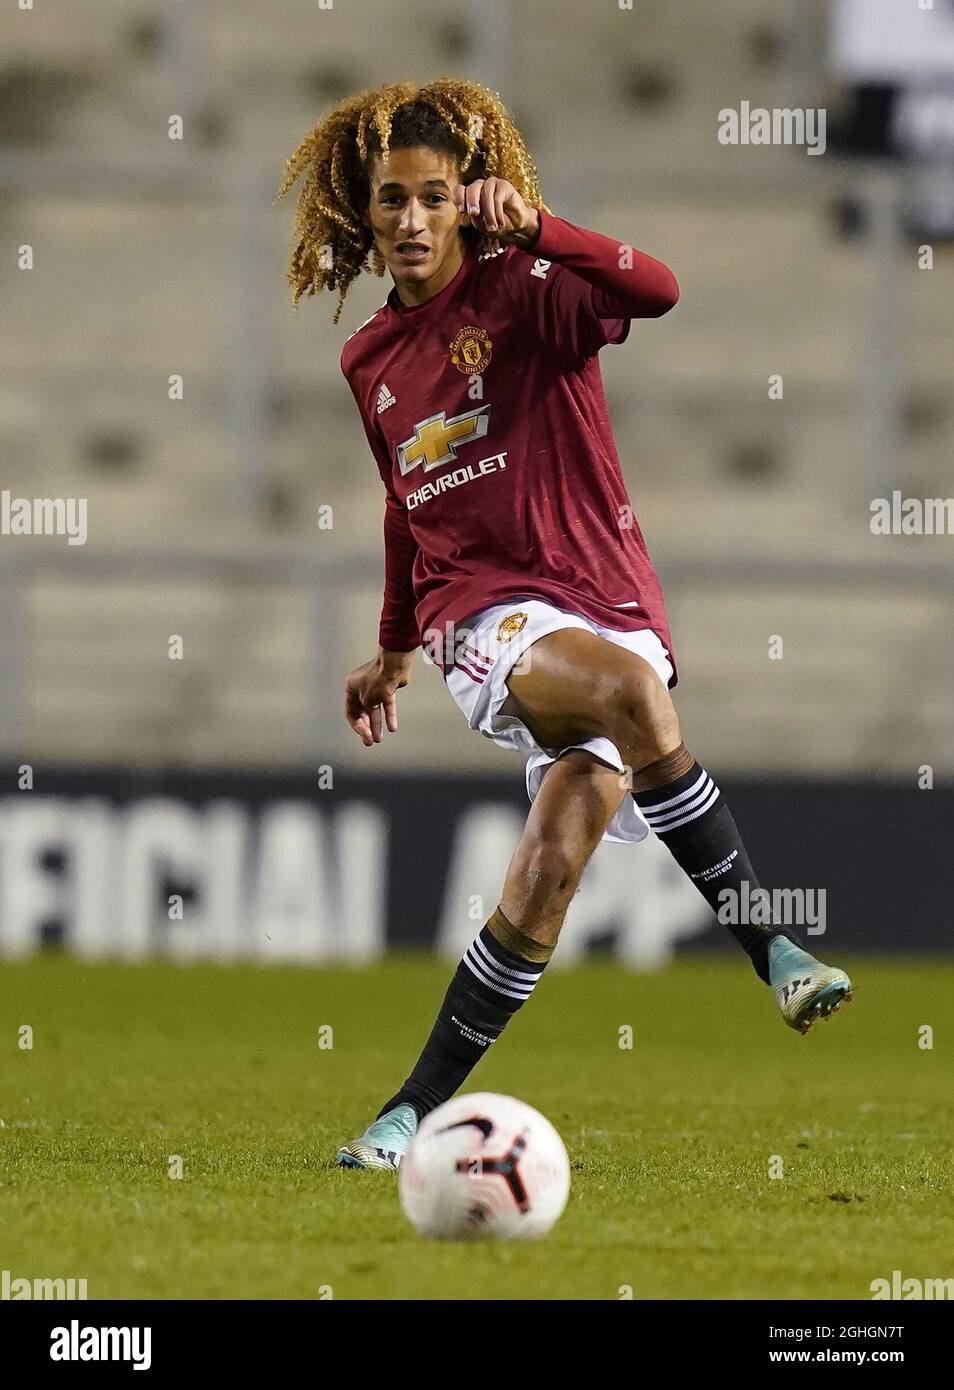 Hannibal Mejbri of Manchester United during the Premier League 2 match at Leigh Sports Village, Leigh. Picture date: 23rd October 2020. Picture credit should read: Andrew Yates/Sportimage via PA Images Stock Photo